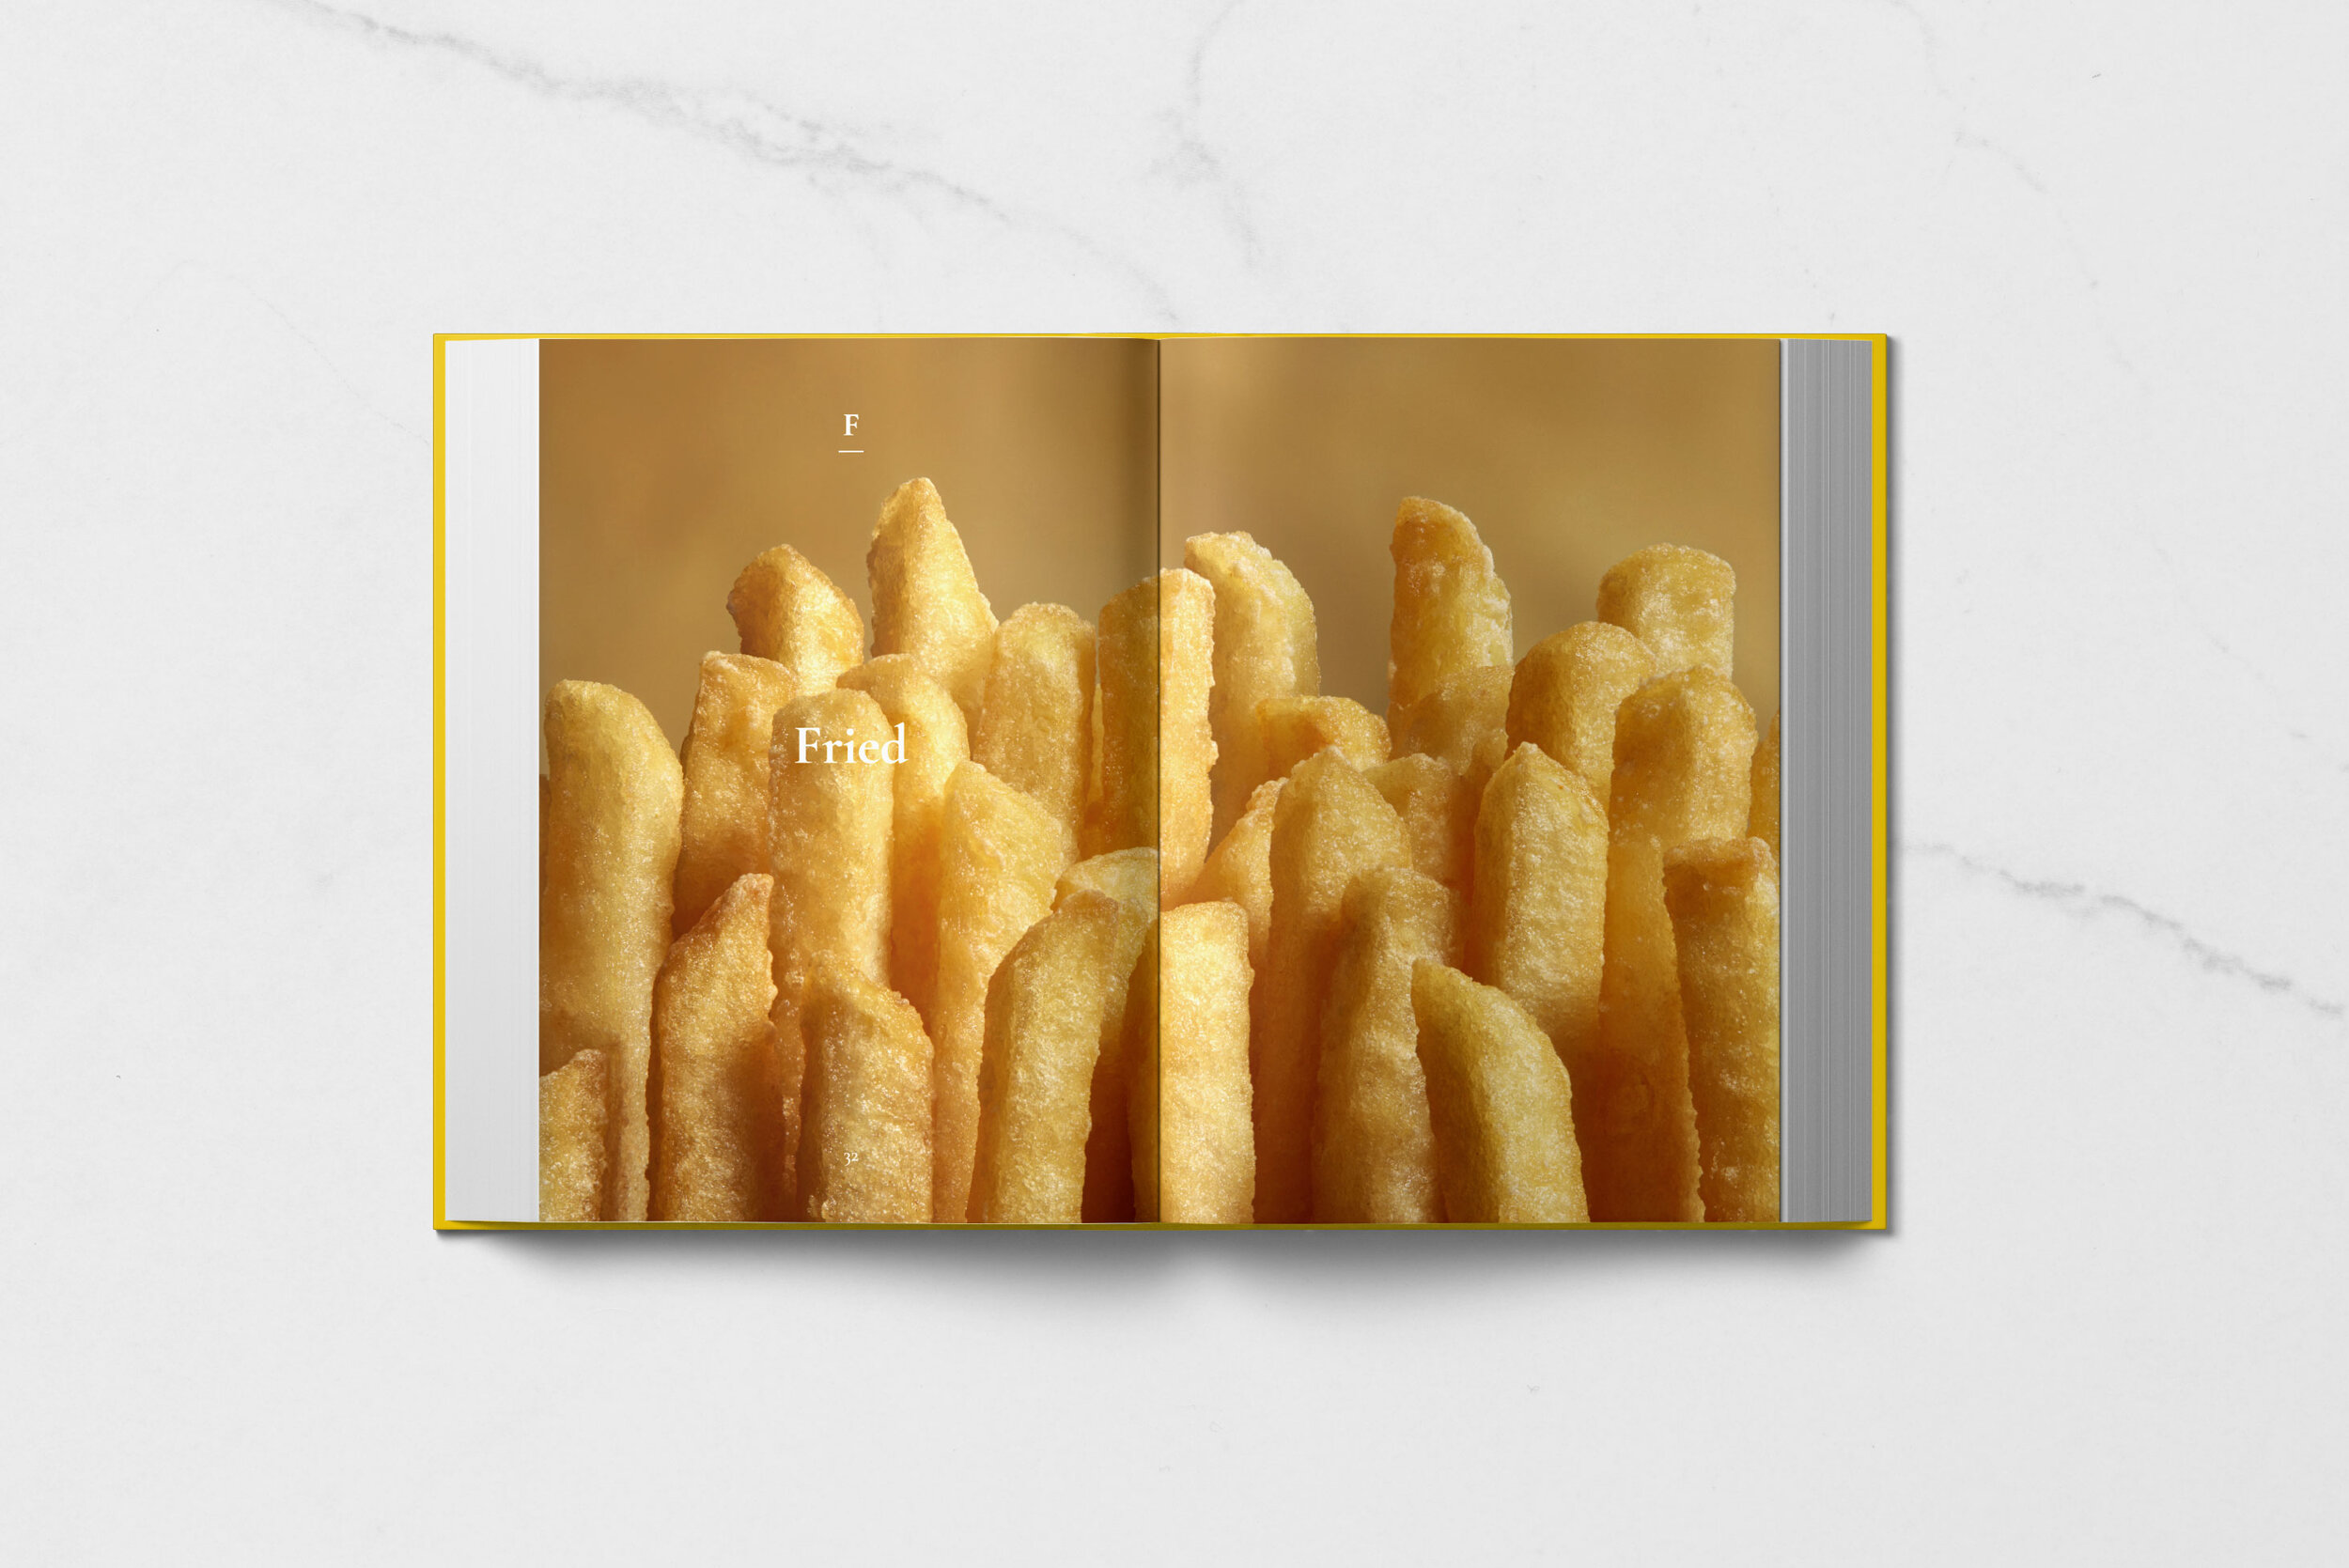 Lucy Ruth Hathaway The Food Styling Encyclopaedia, food photography art book, commercial food stylist, commercial food photography, food stylist tricks, food styling photography vocabulary, food artist, fried food styling